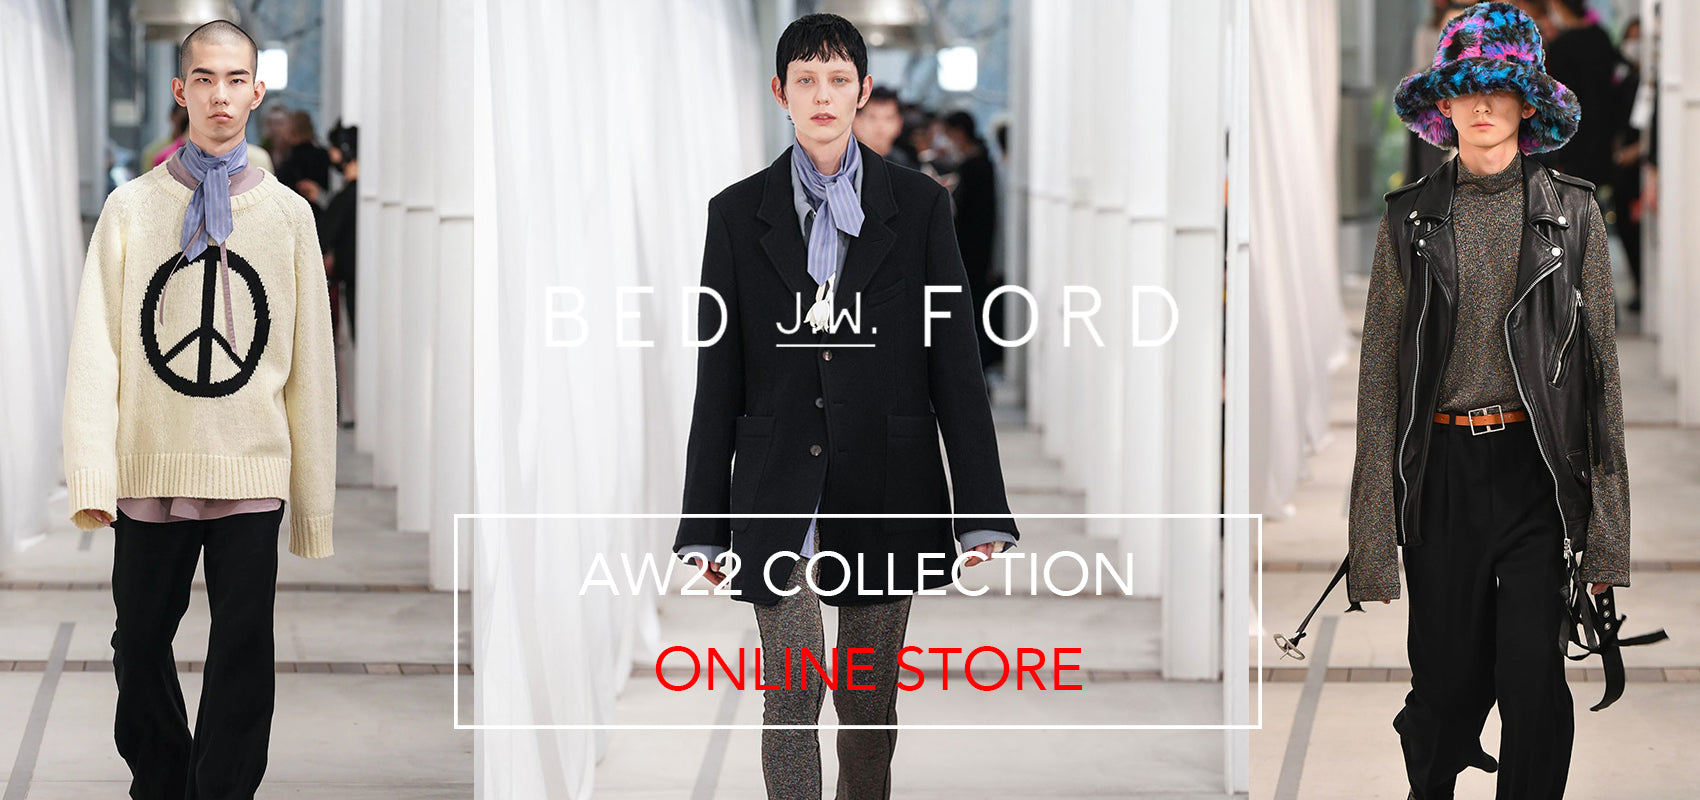 BED j.w. FORD  SS22 COLLECTION オンラインストアにて発売。